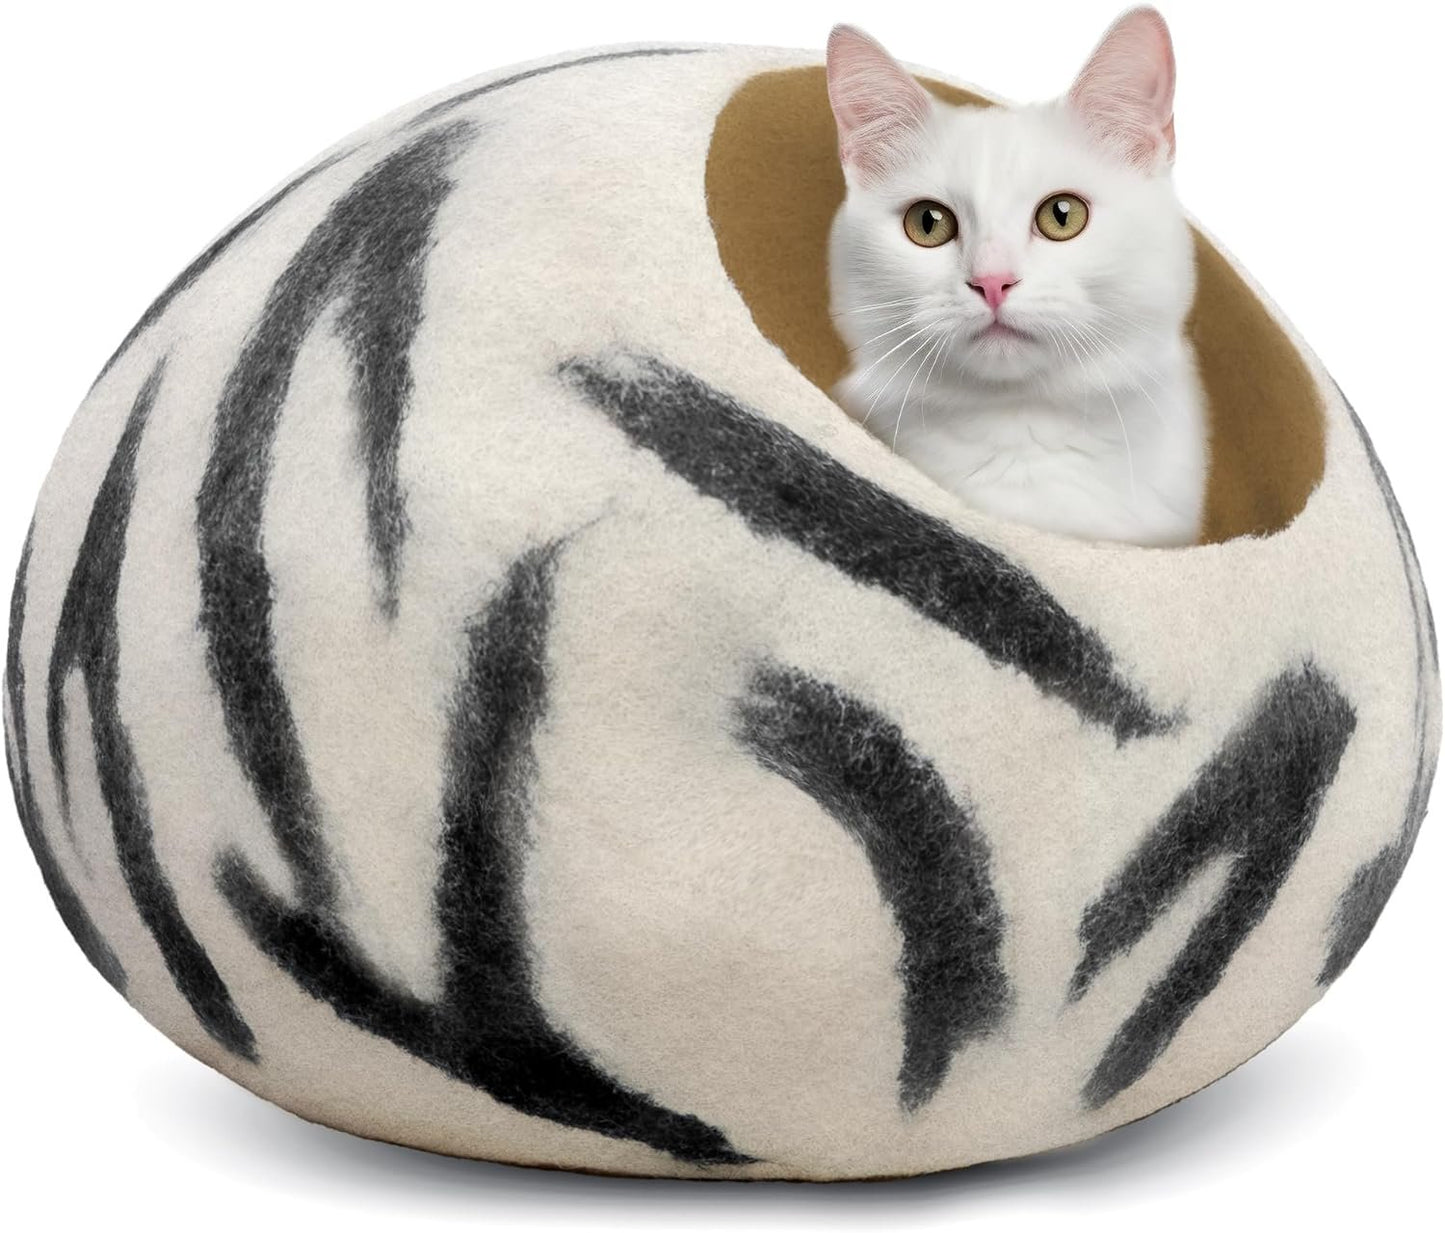 Woolygon Premium Felt Cat Cave Bed – Wool Kitty Beds Handcrafted Kitten Caves Bed for Indoor Cats - Made from 100% Eco-Friendly Merino Wool, Foldable Cat Hidewawy Covered Cat House Pod (Rainbow Twist)